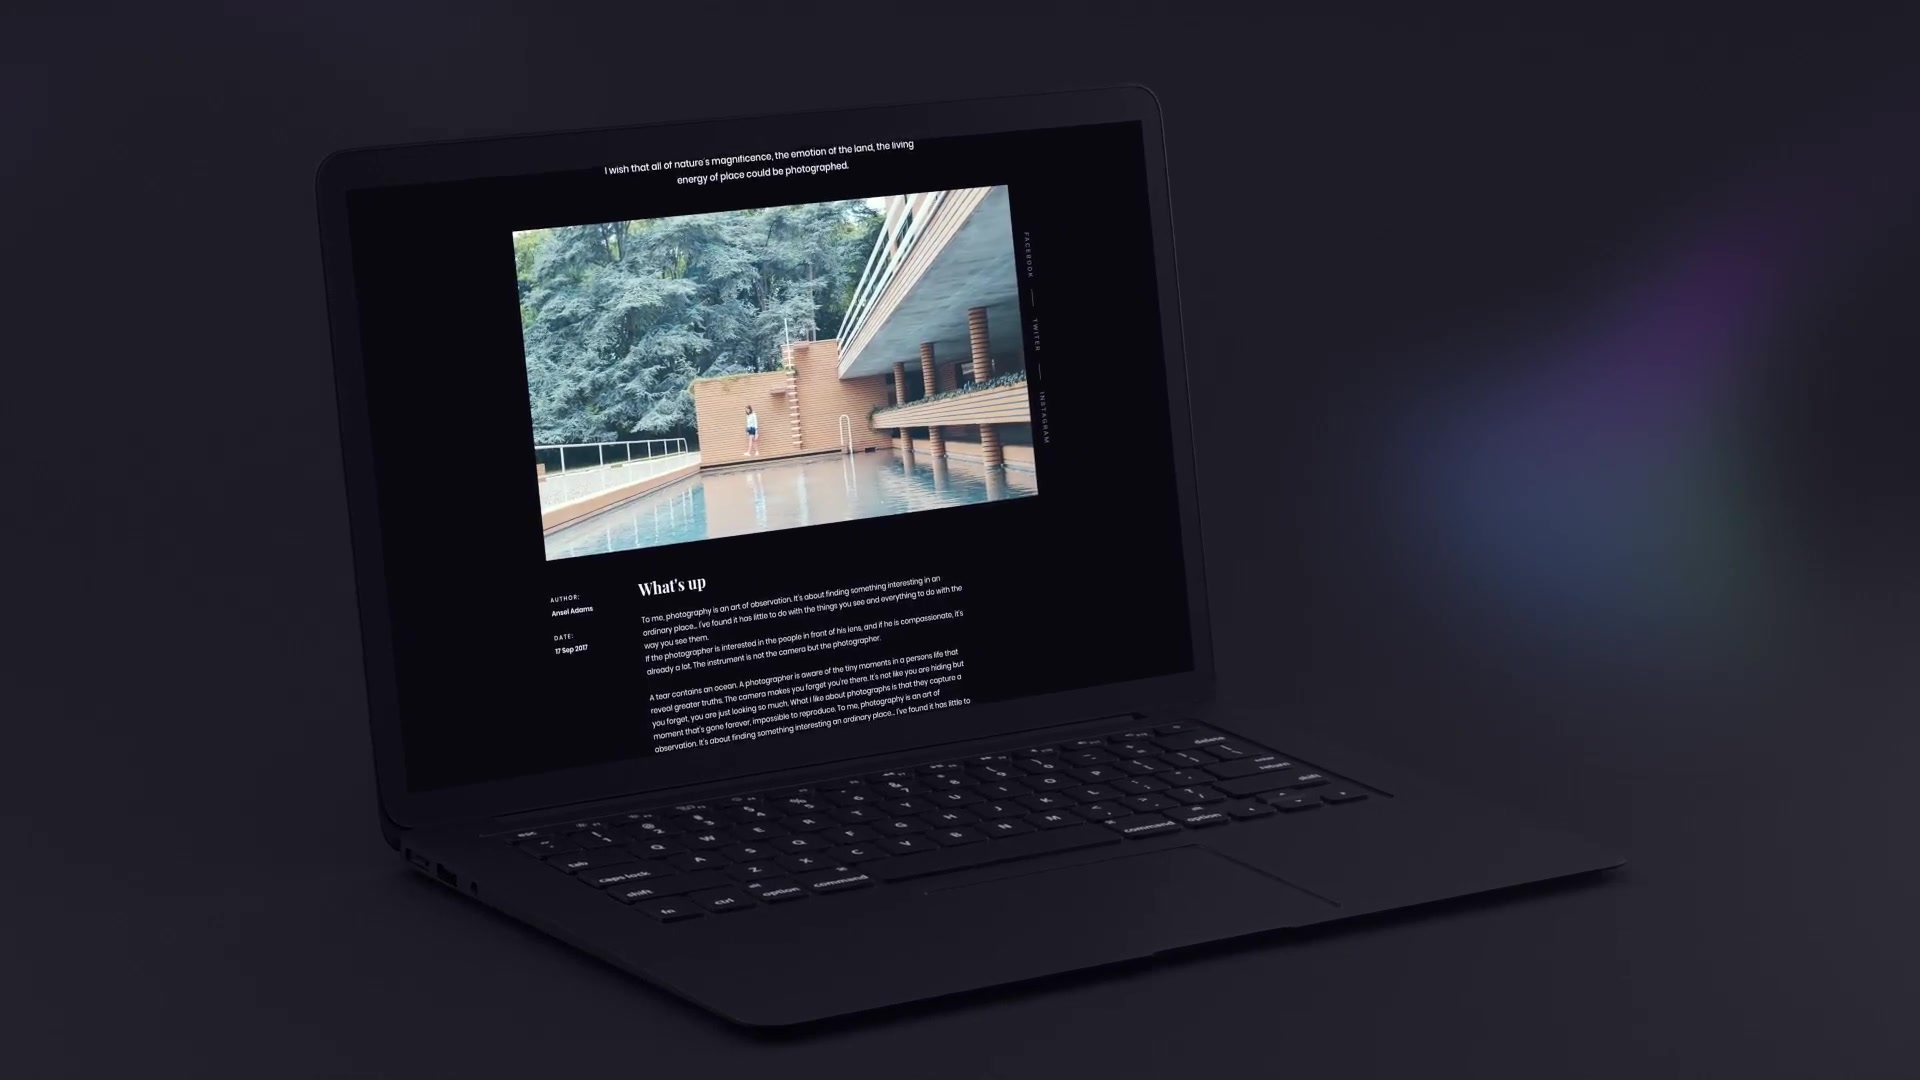 Download Animated Laptop Mockup 2 in 1 Direct Download 23431296 Videohive After Effects